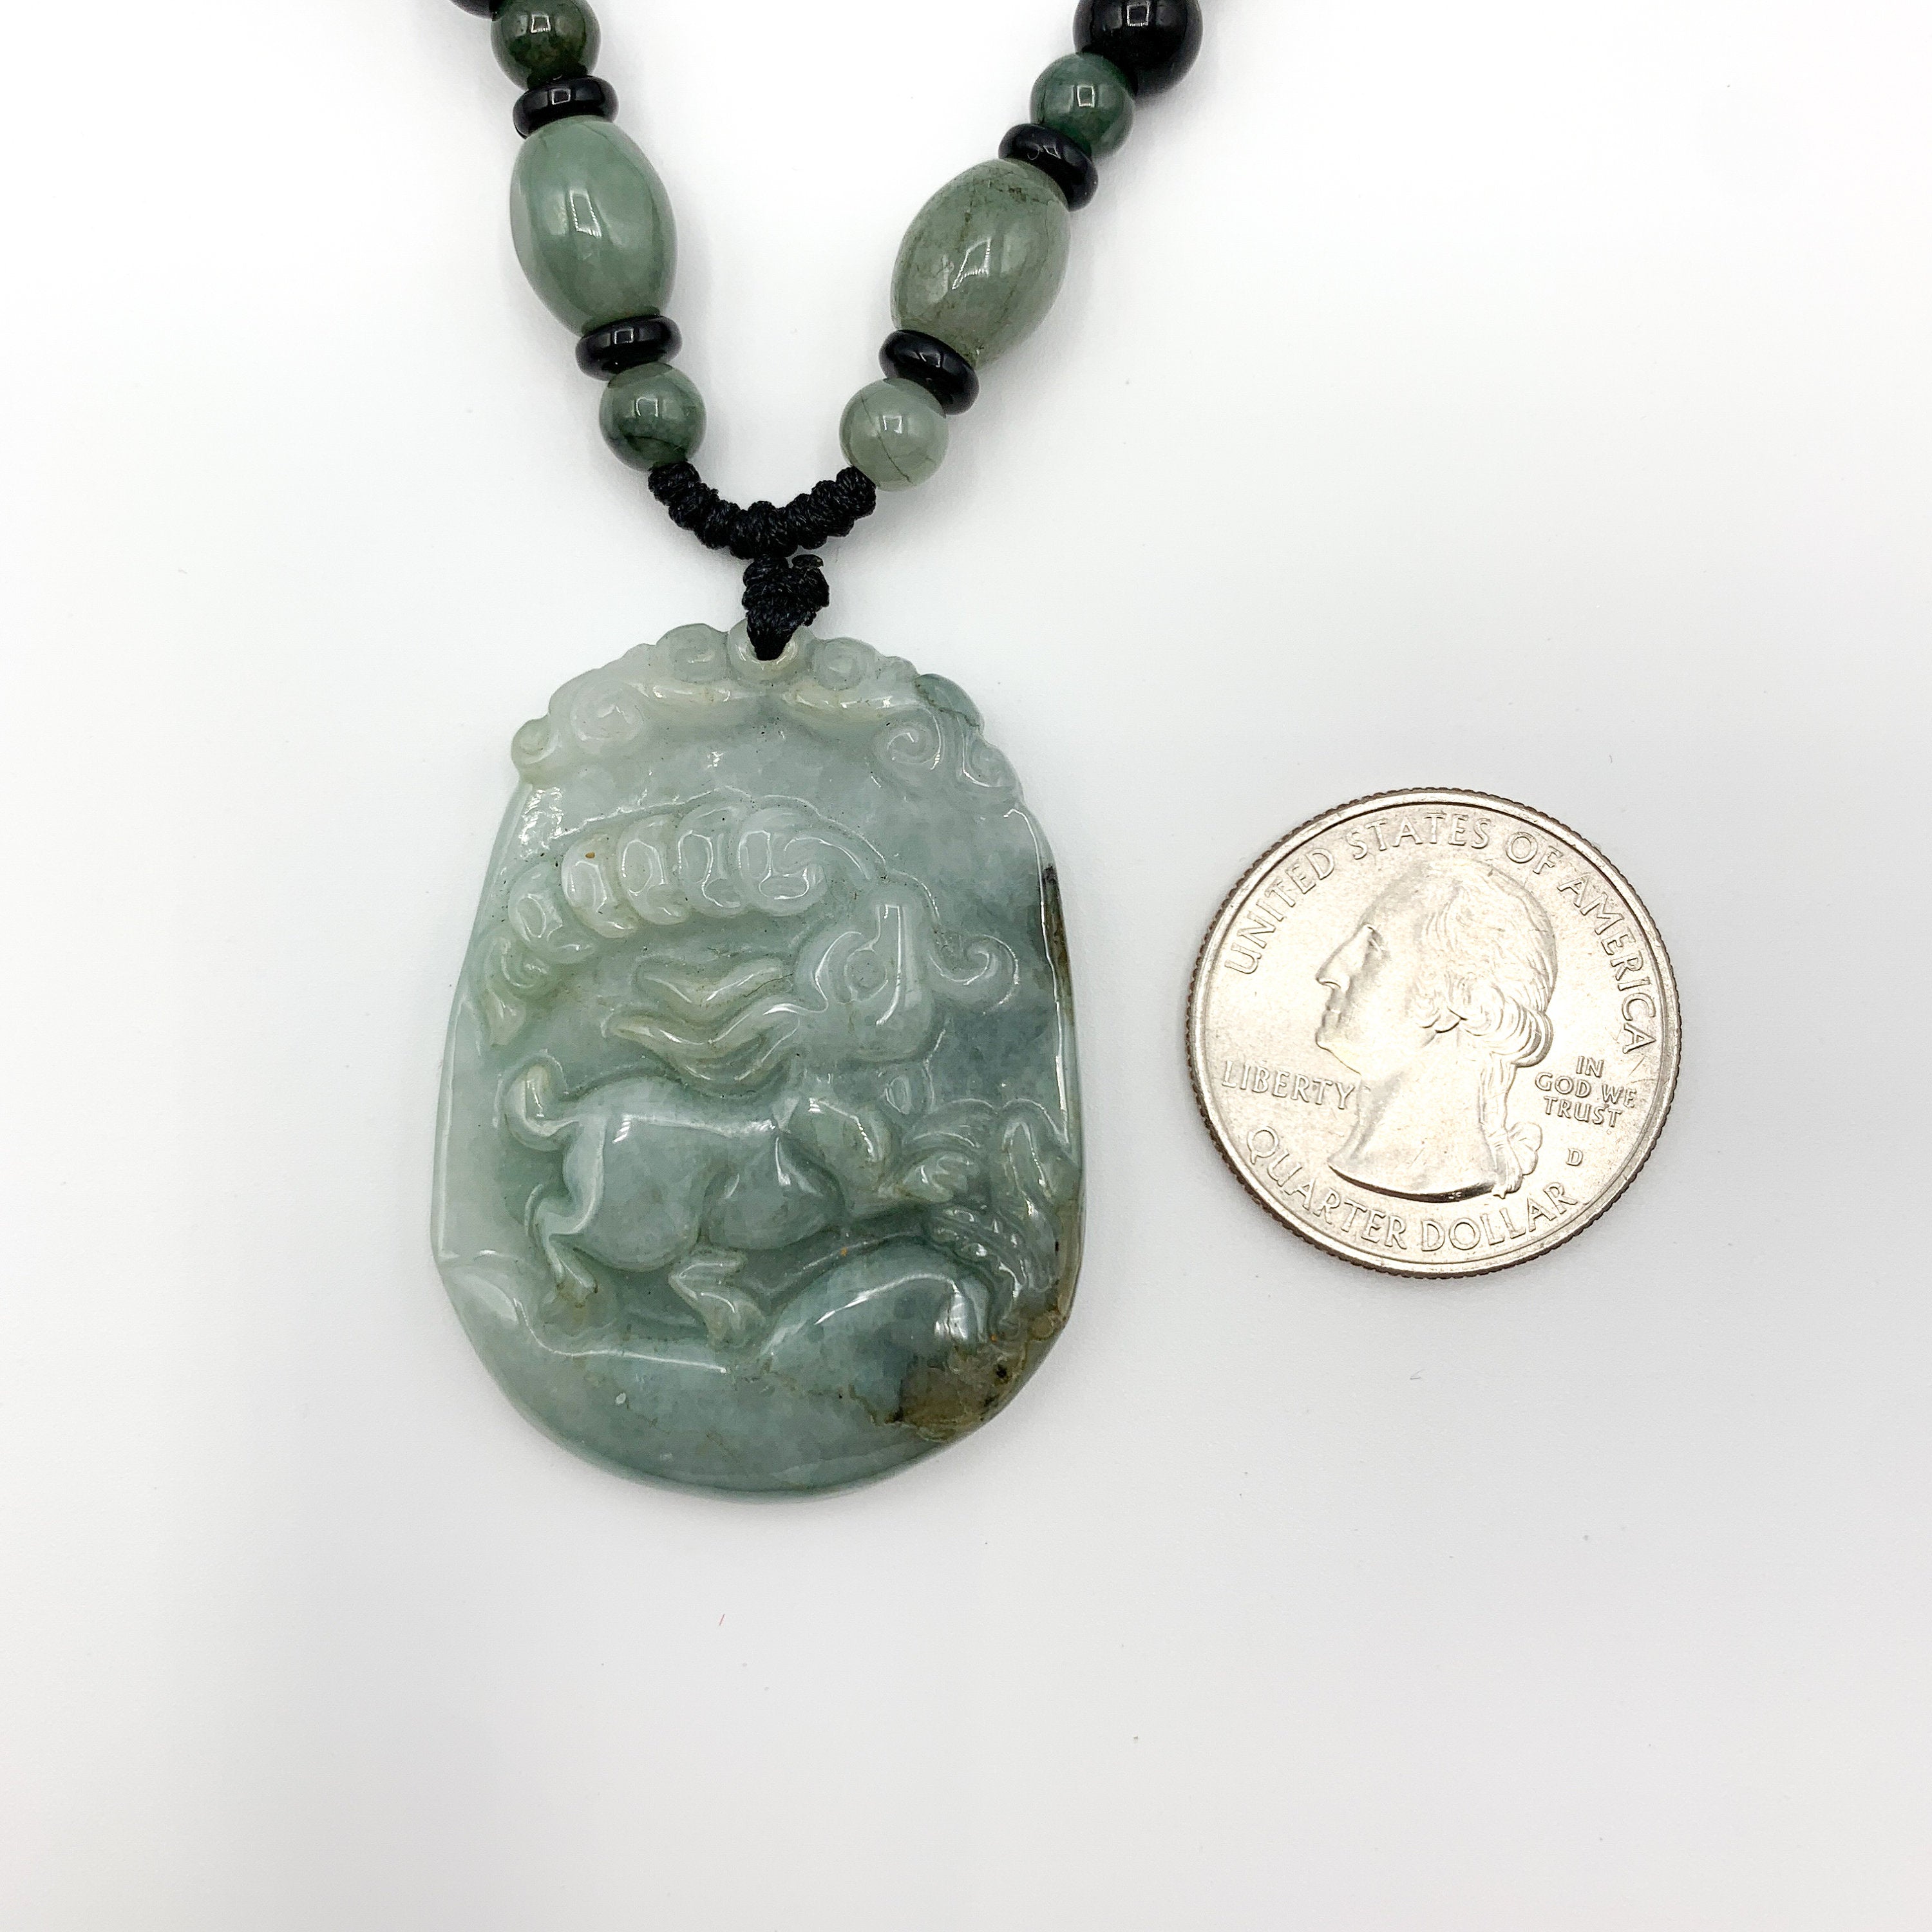 Buy Real Green Jade Ox Necklace, Personalized Engraved Named Pendant,  Chinese Zodiac Year of Cow Charm, Grade A Jadeite Carving Gift Men Women  Online in India - Etsy